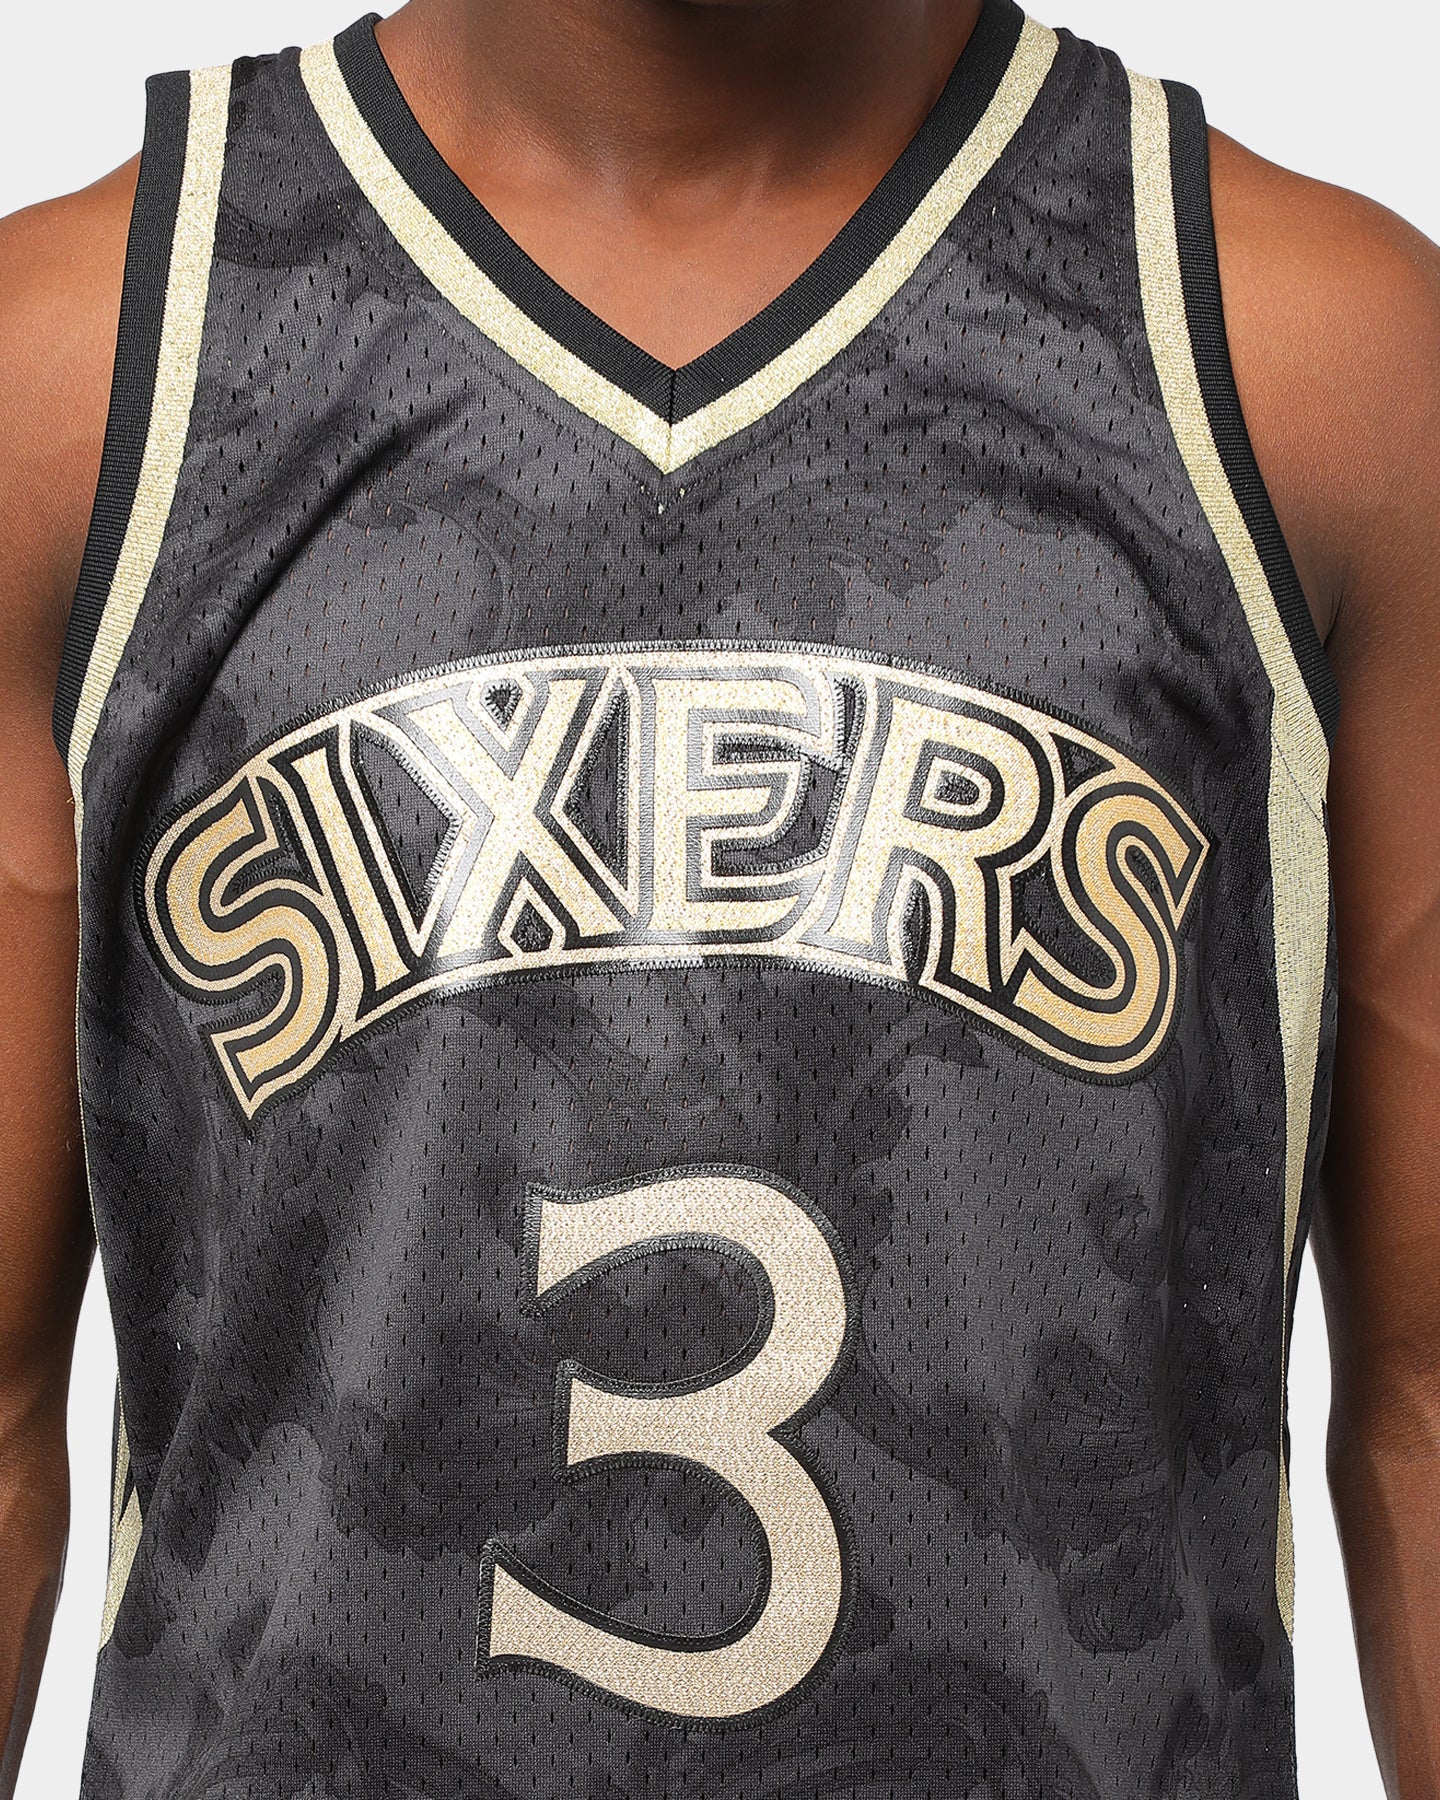 gold iverson jersey